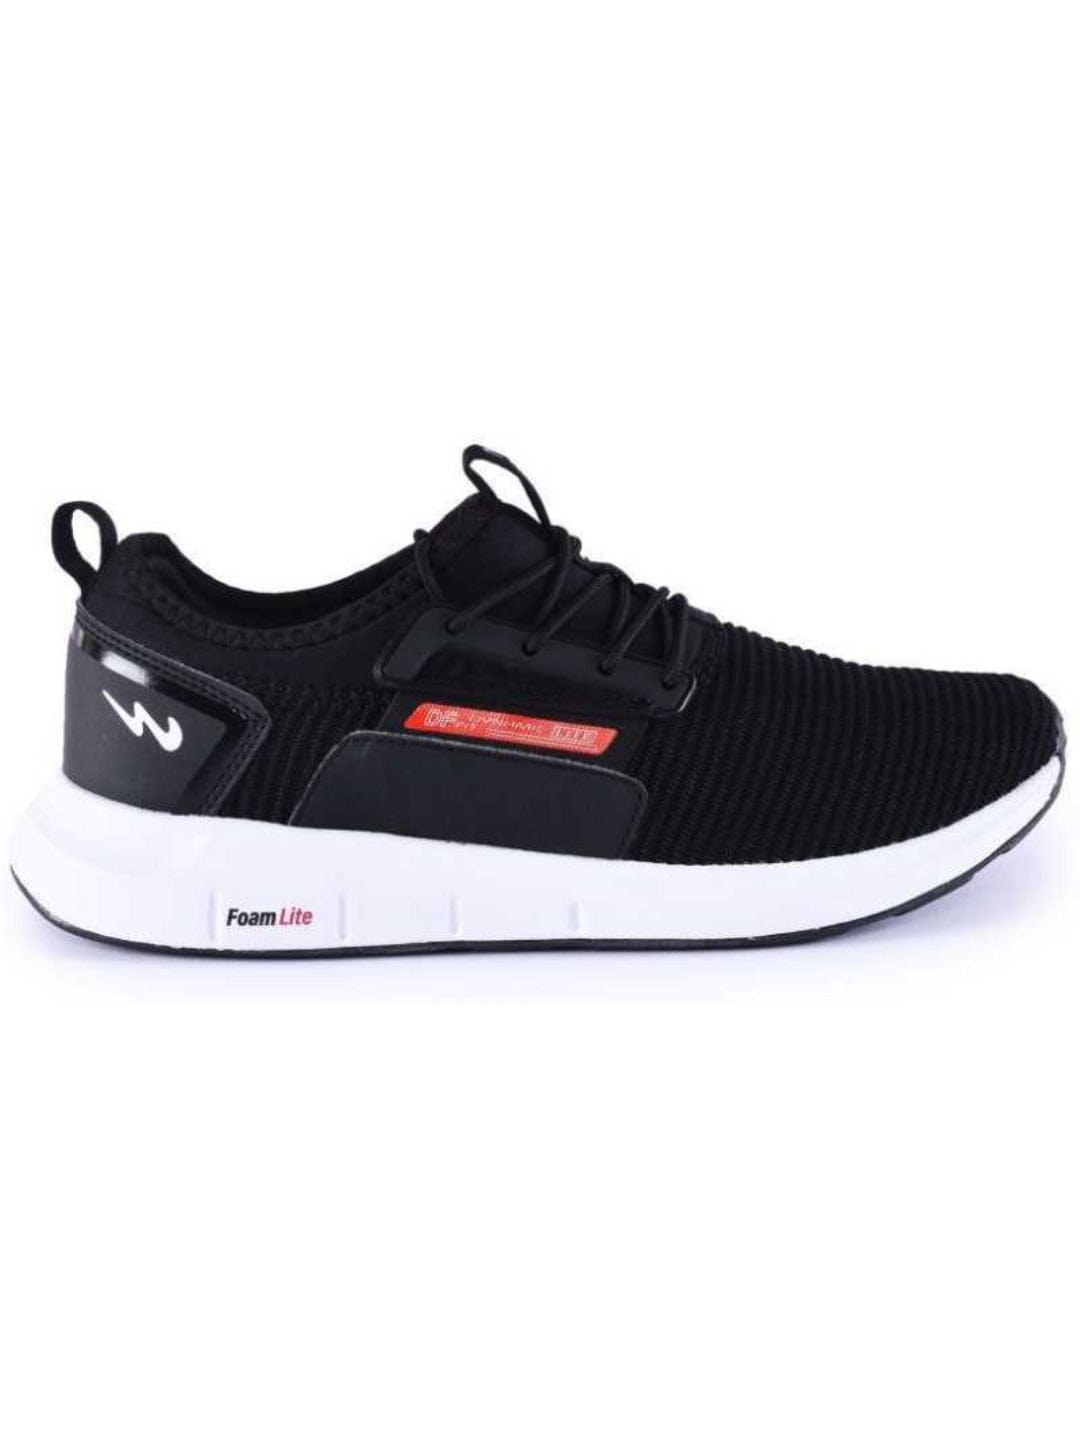 Buy Sports Shoes for Women Only at Metro Shoes